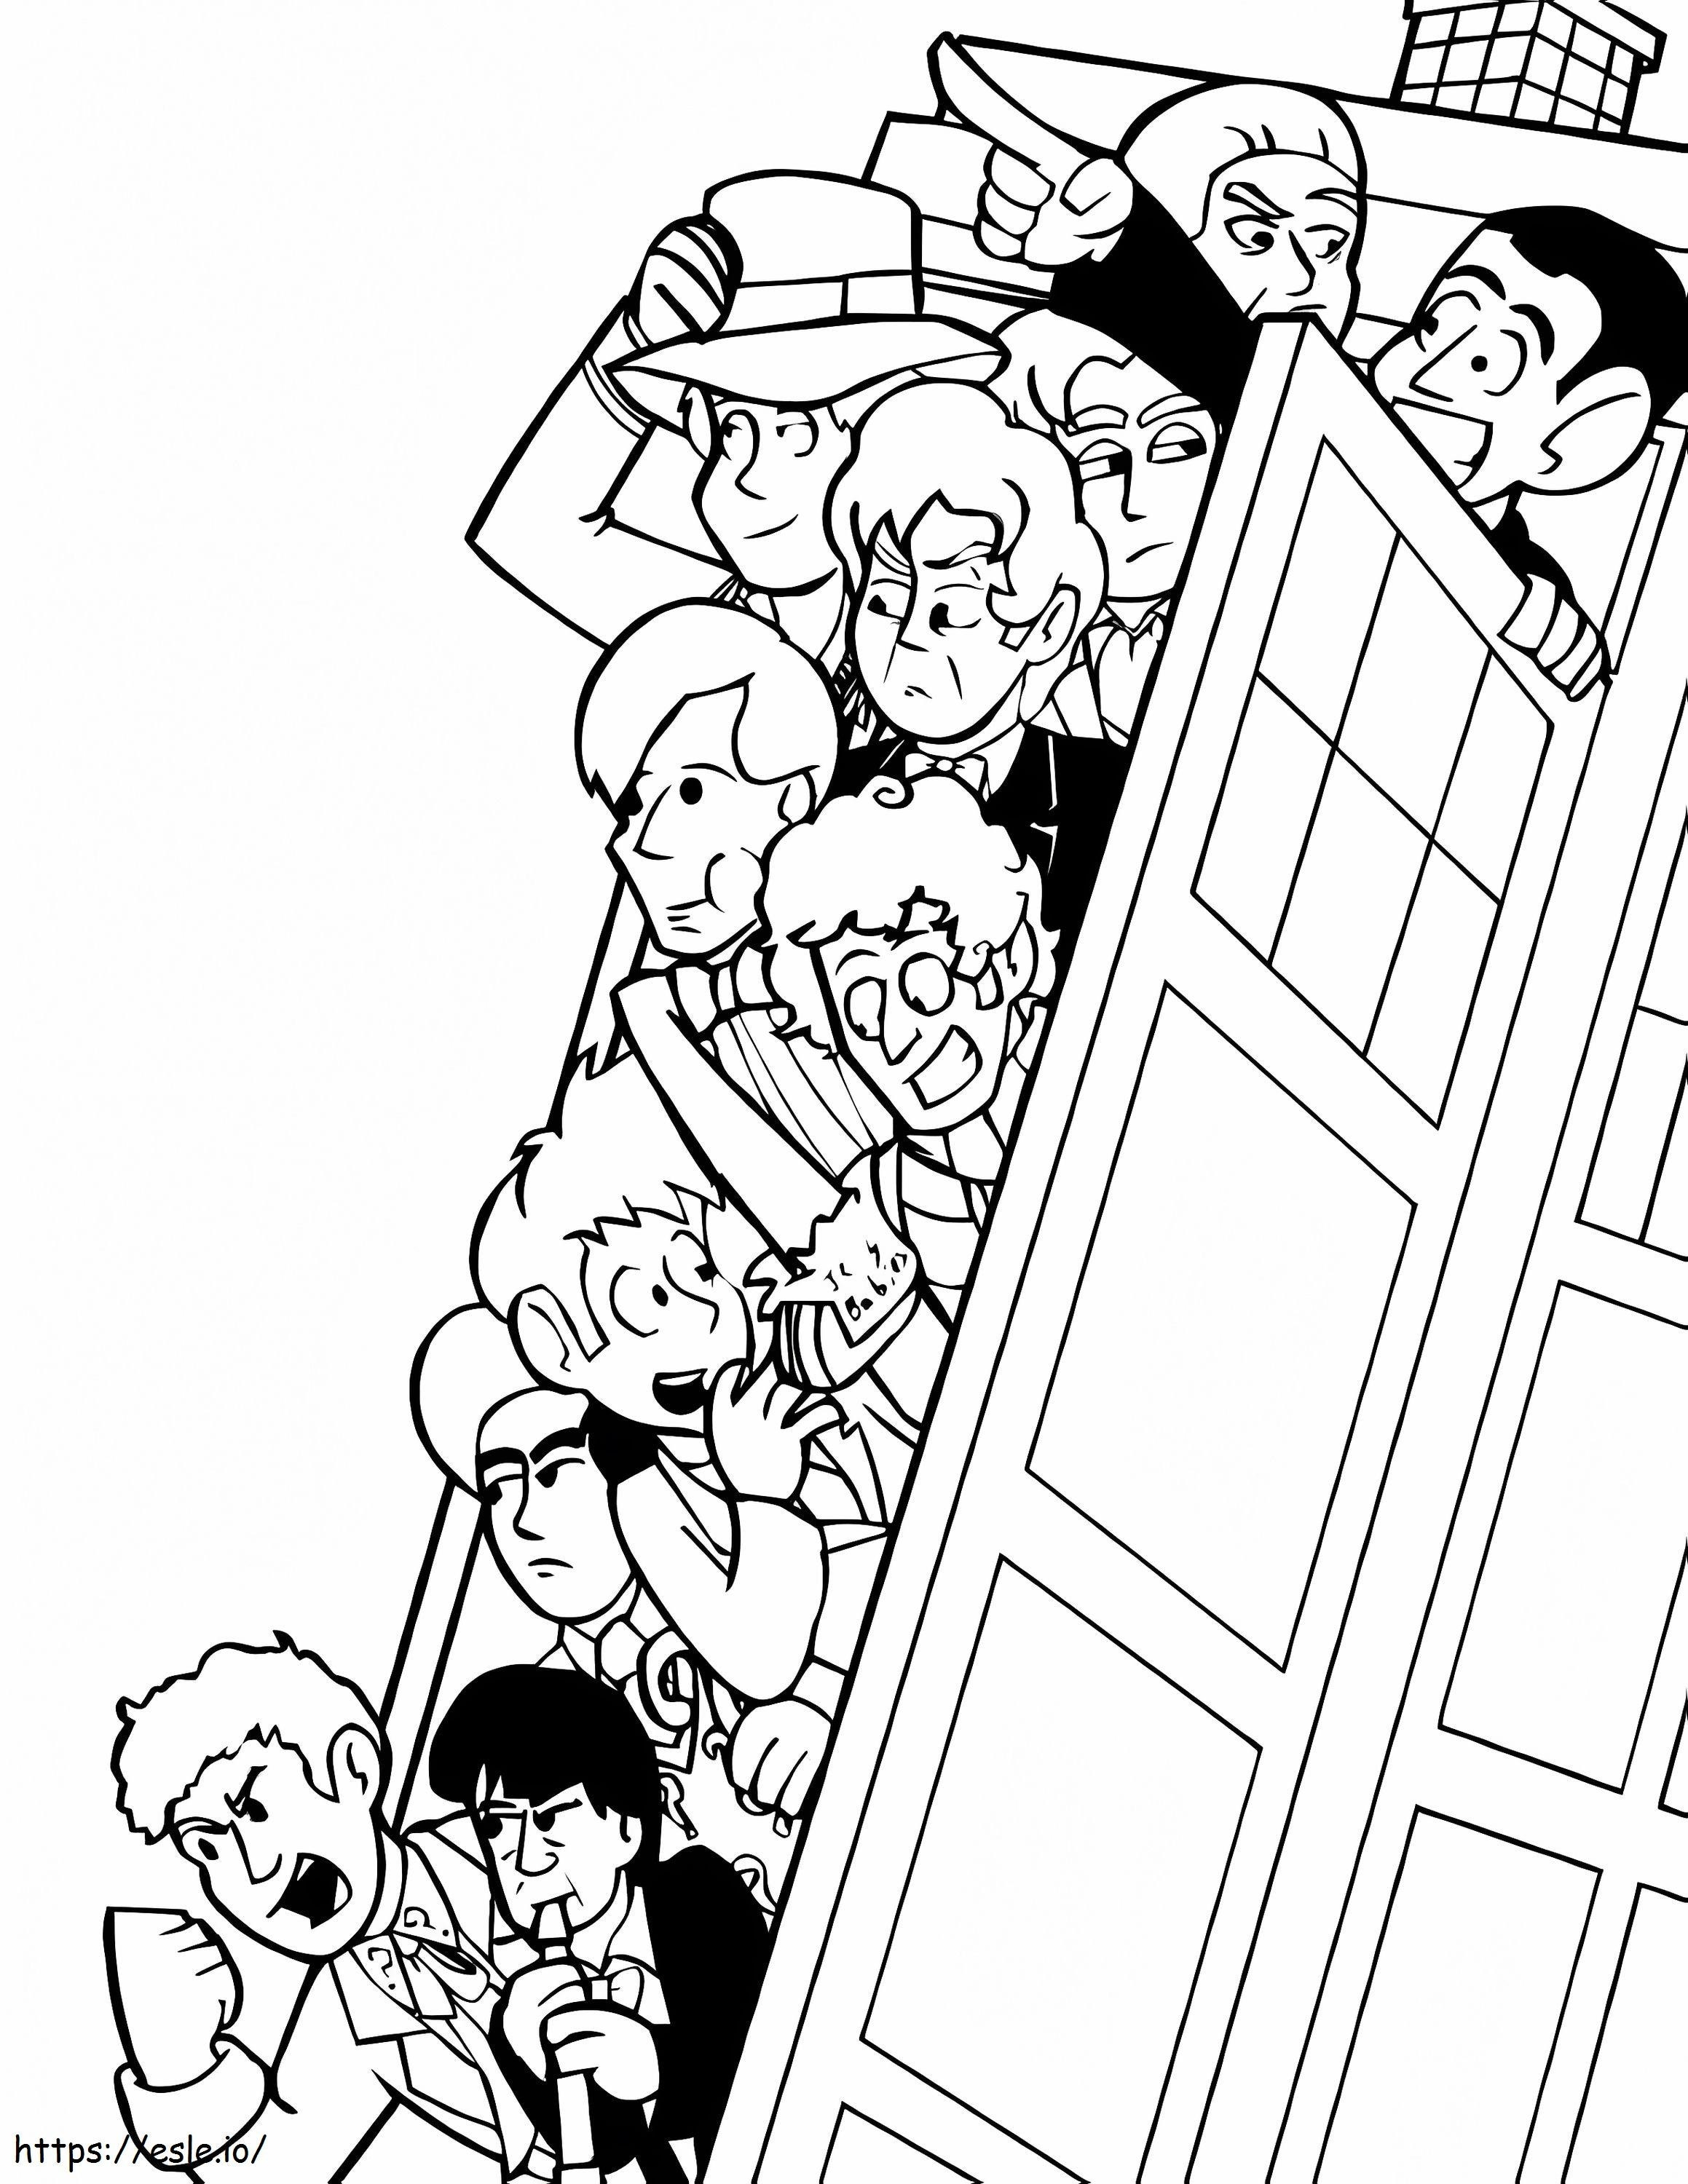 Doctor Who 12 coloring page